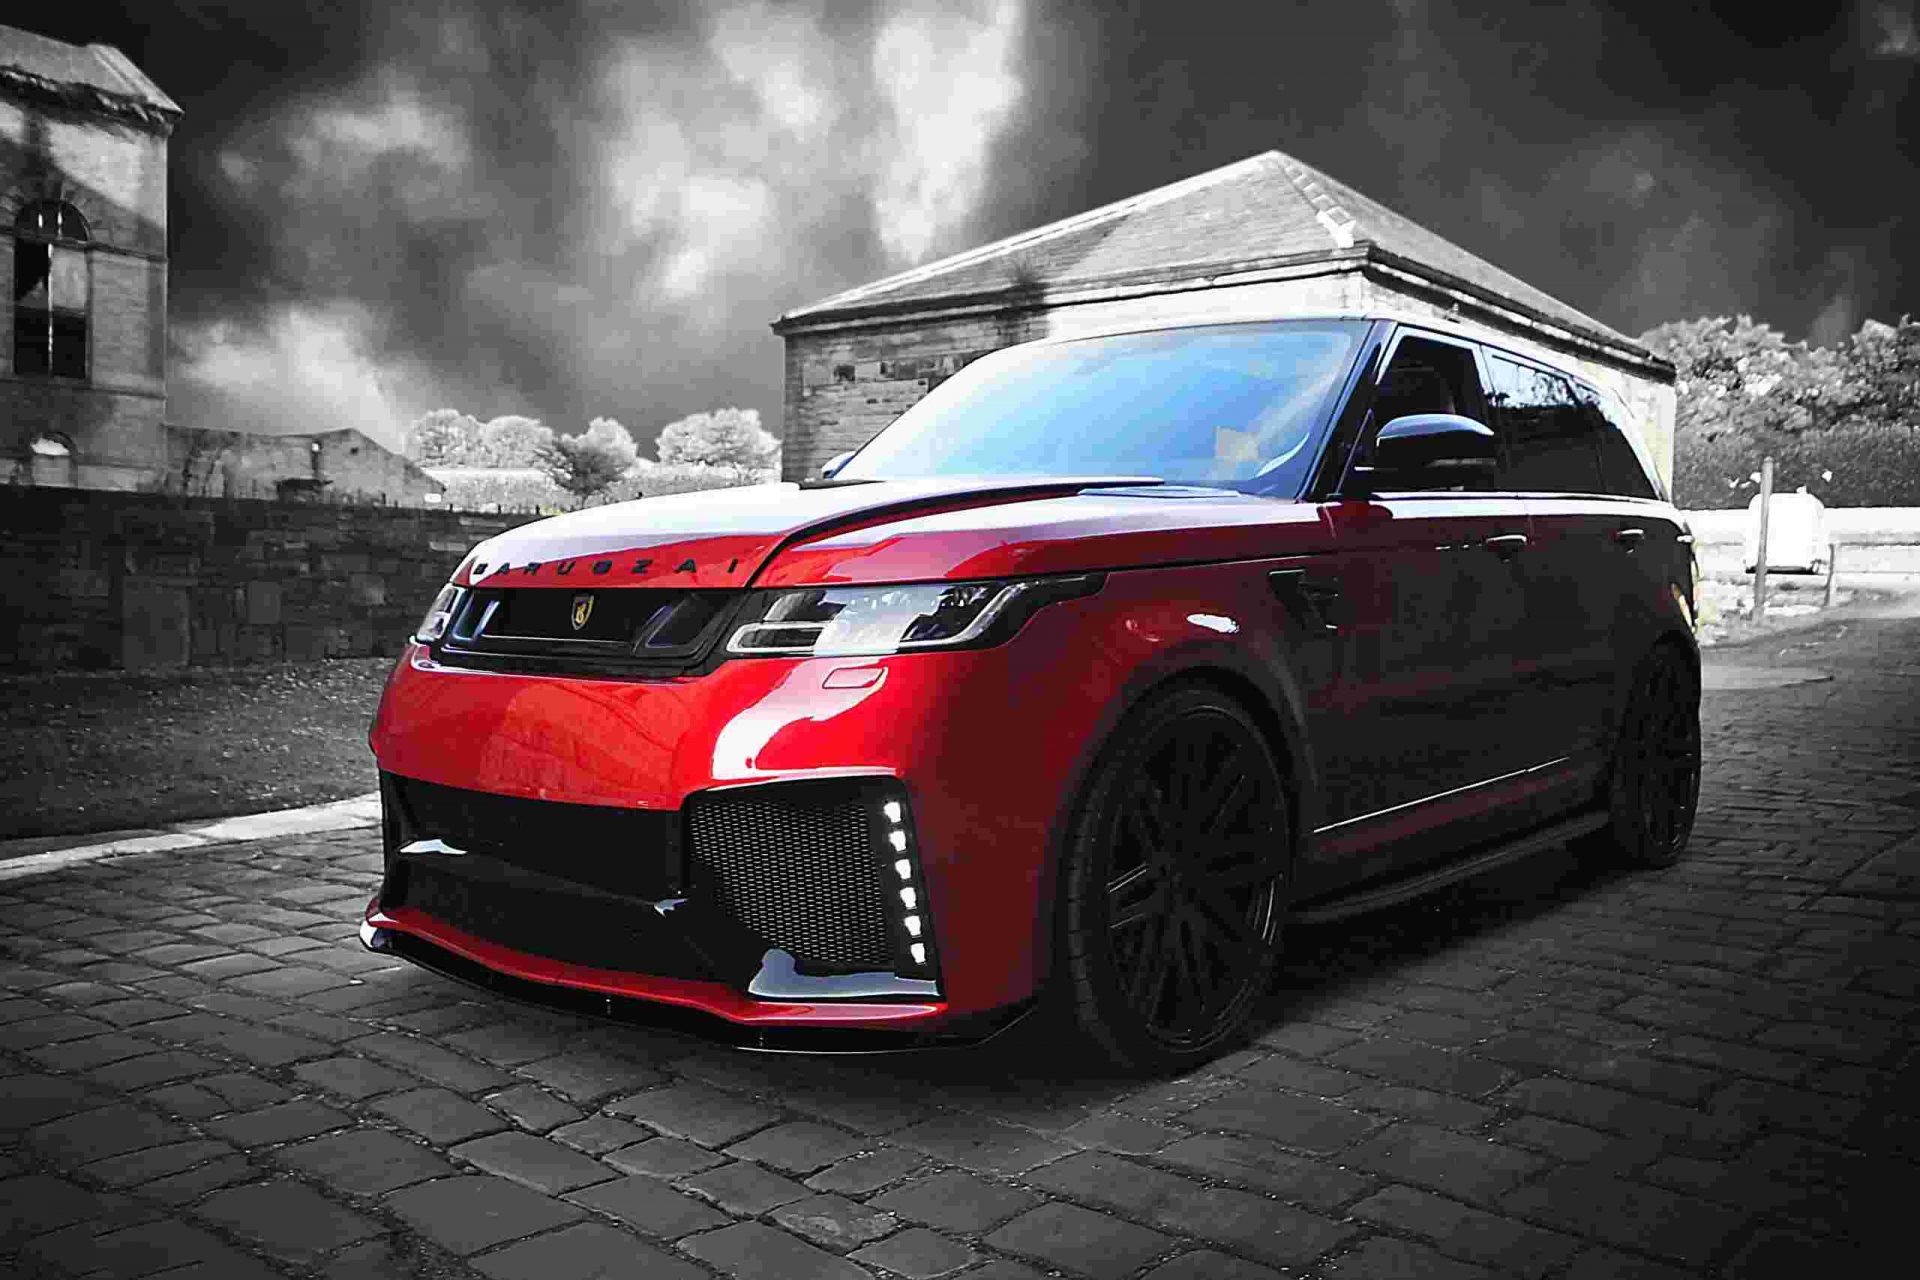 Check our price and buy Barugzai Cabaro II body kit for Land Rover Range Rover Sport